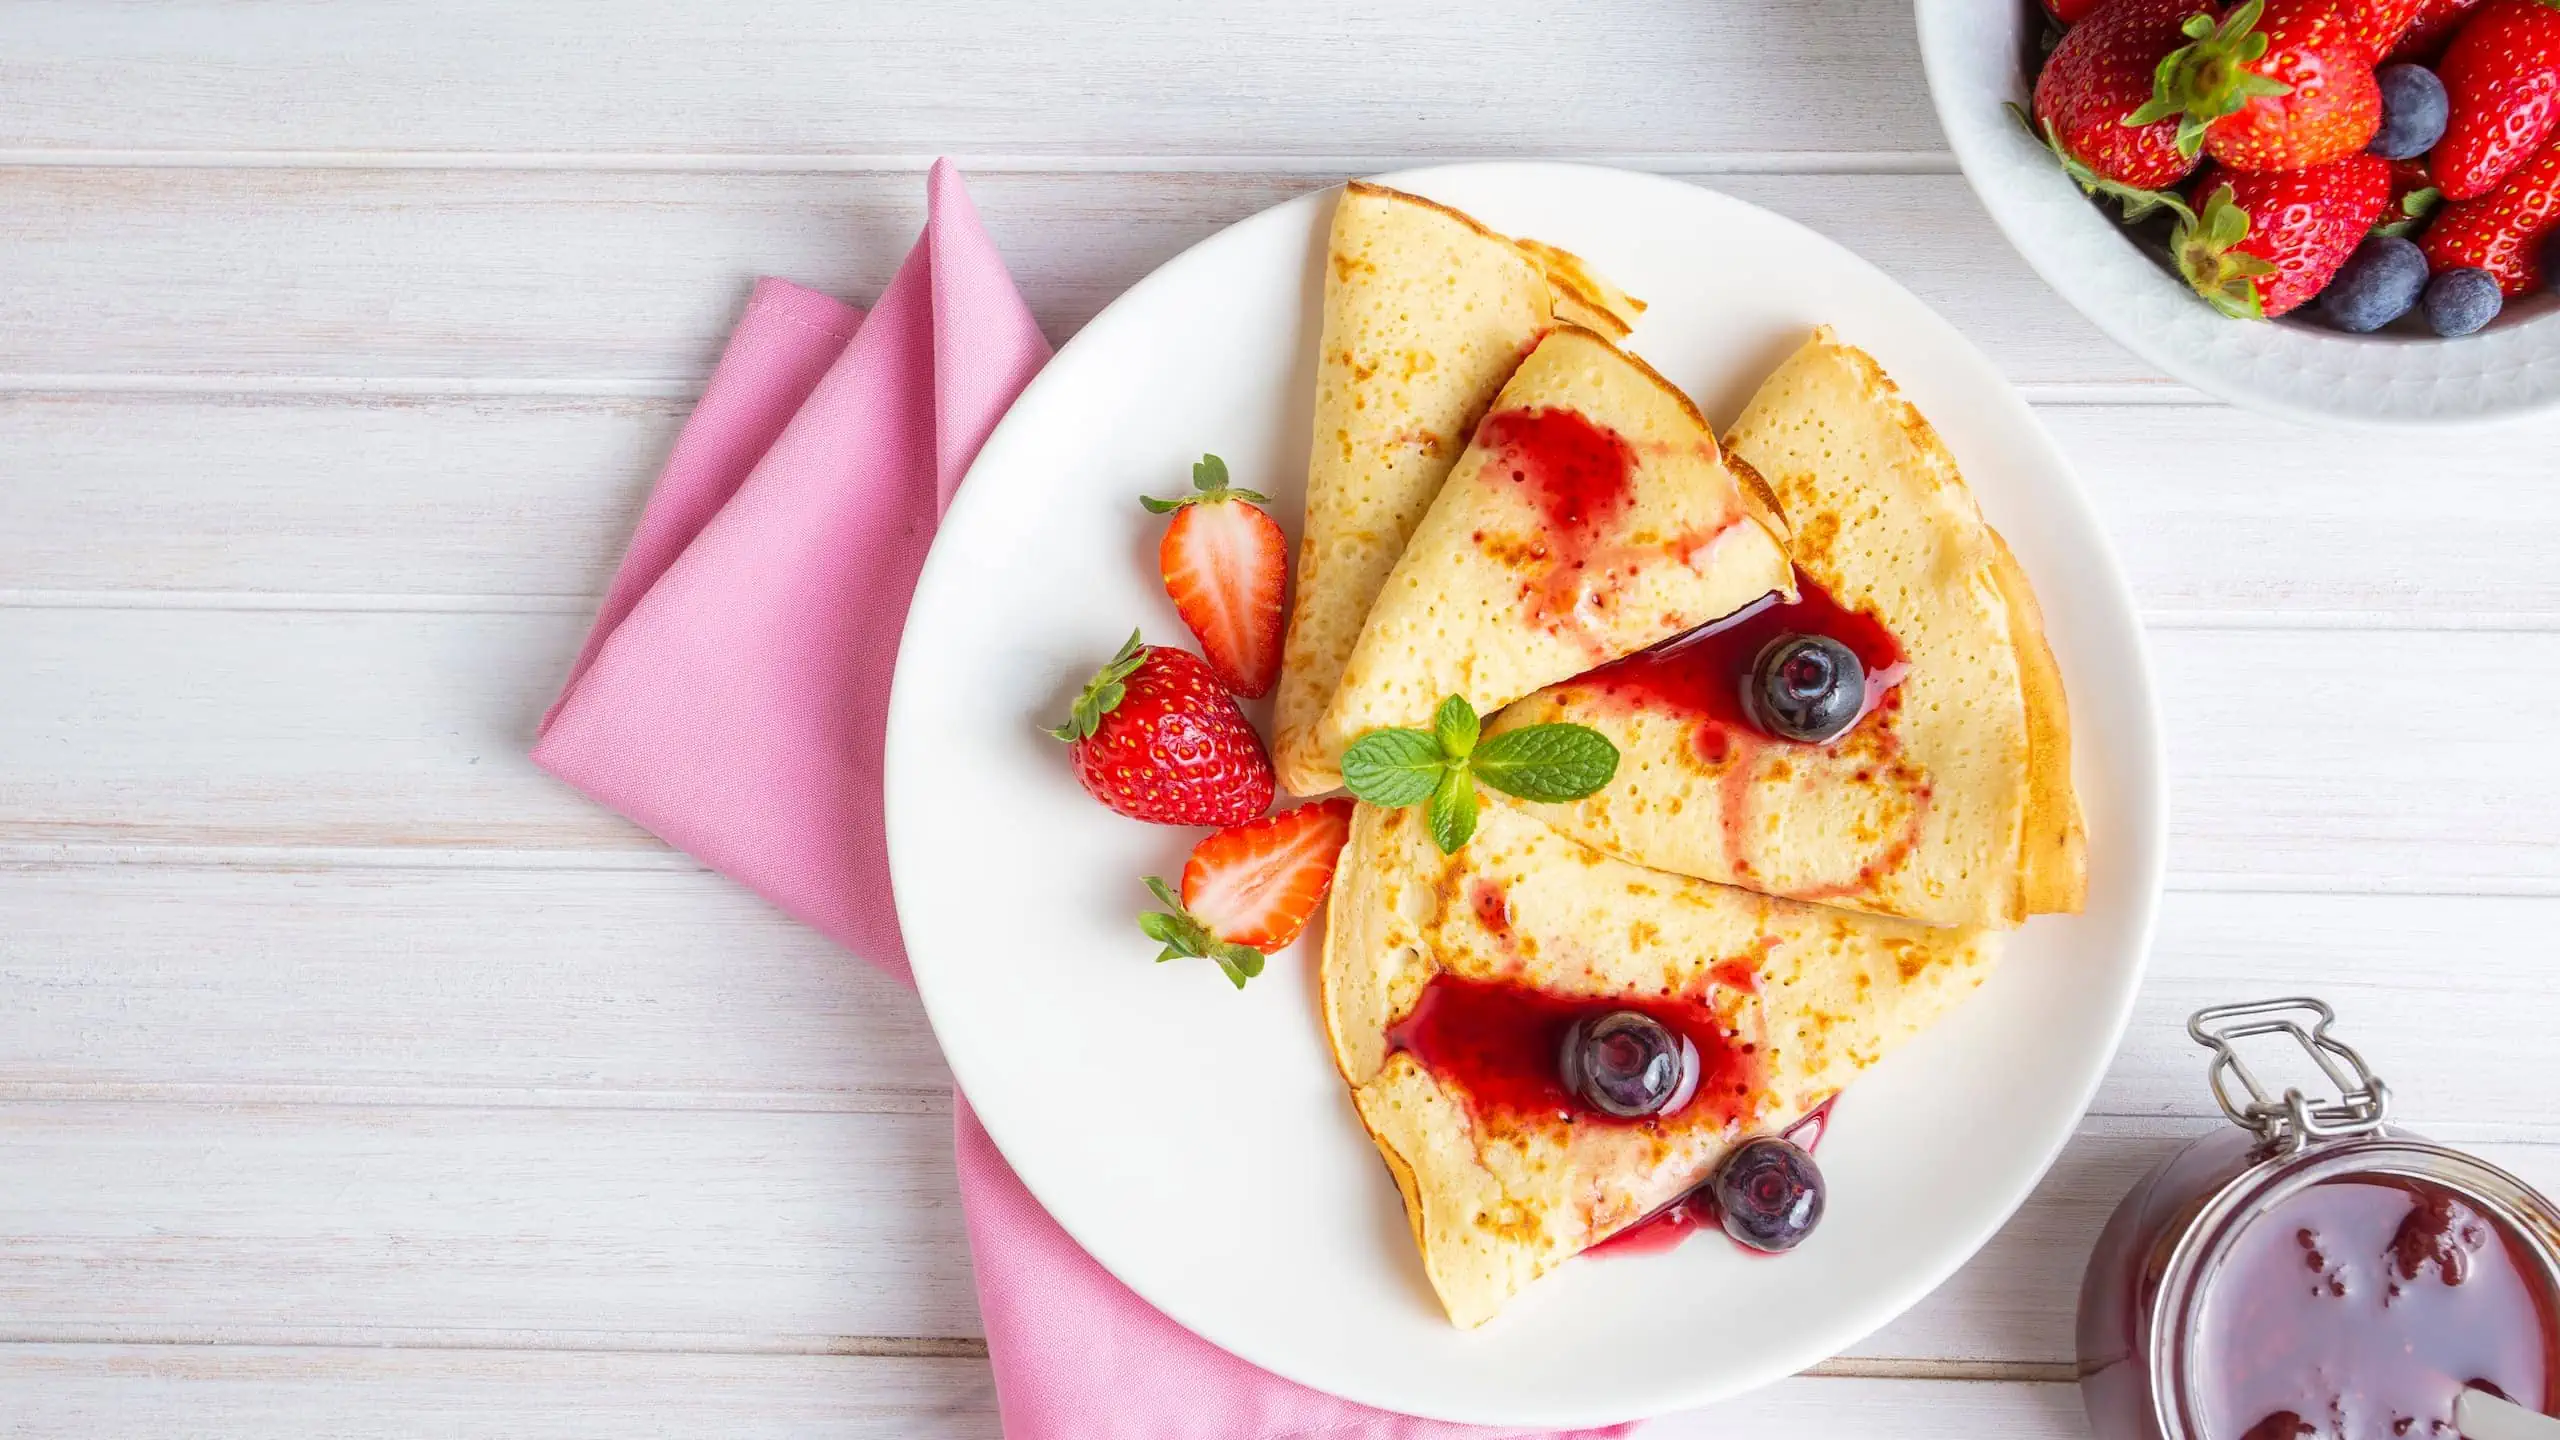 Our version of a single-serving crepe